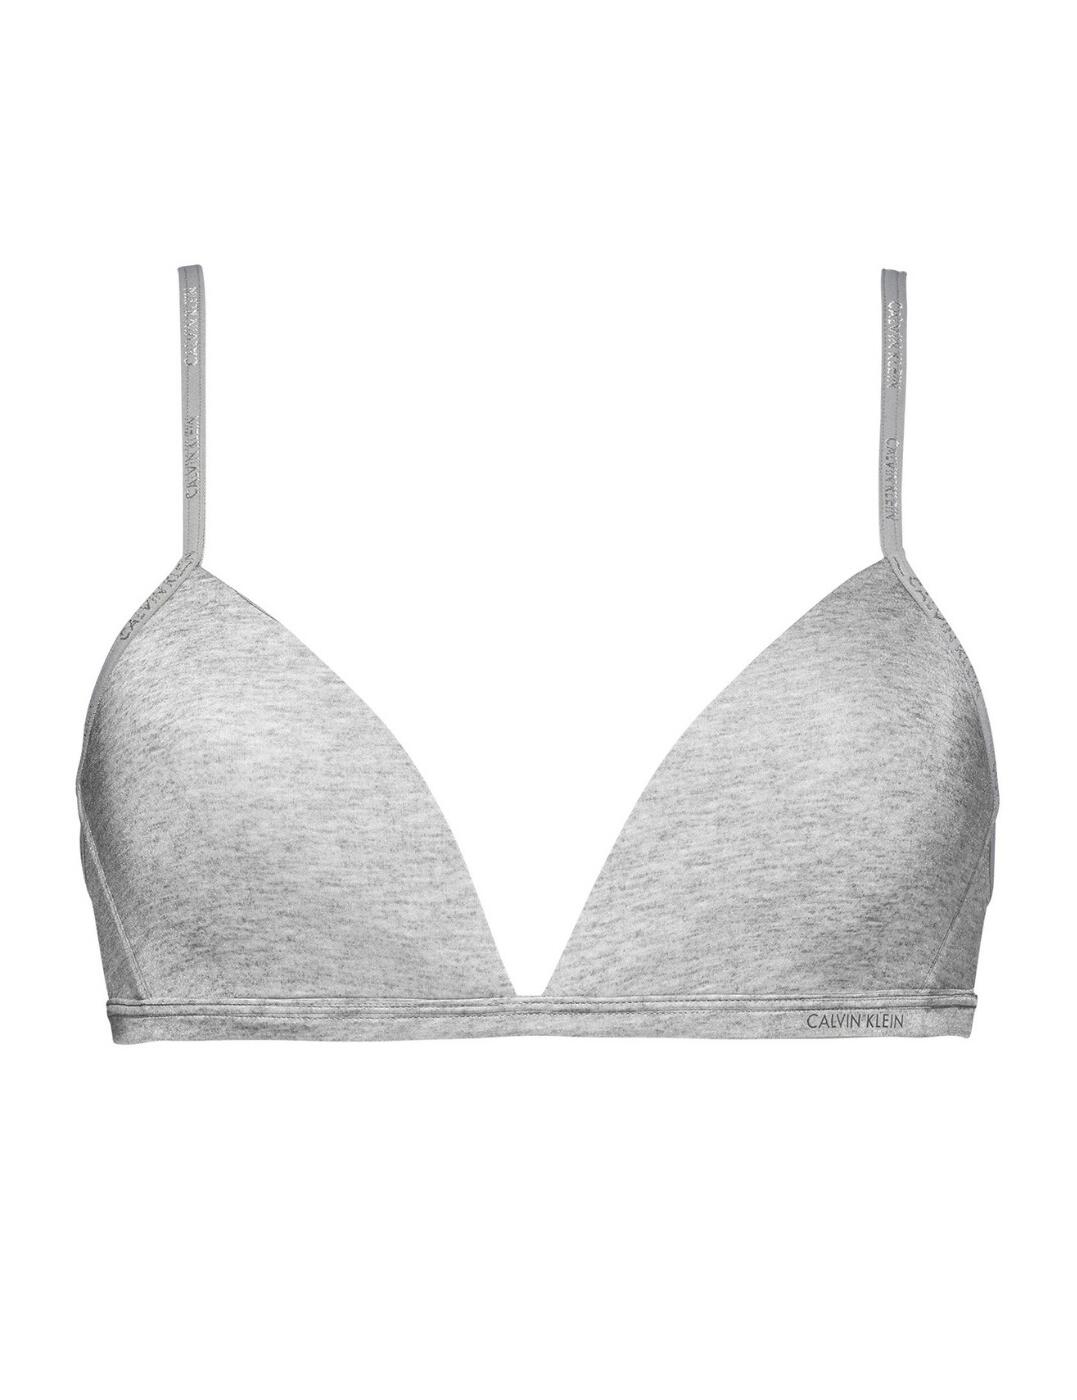  Calvin Klein Youthful Lingerie Lightly Lined Triangle Bra Printed Grey Heather 